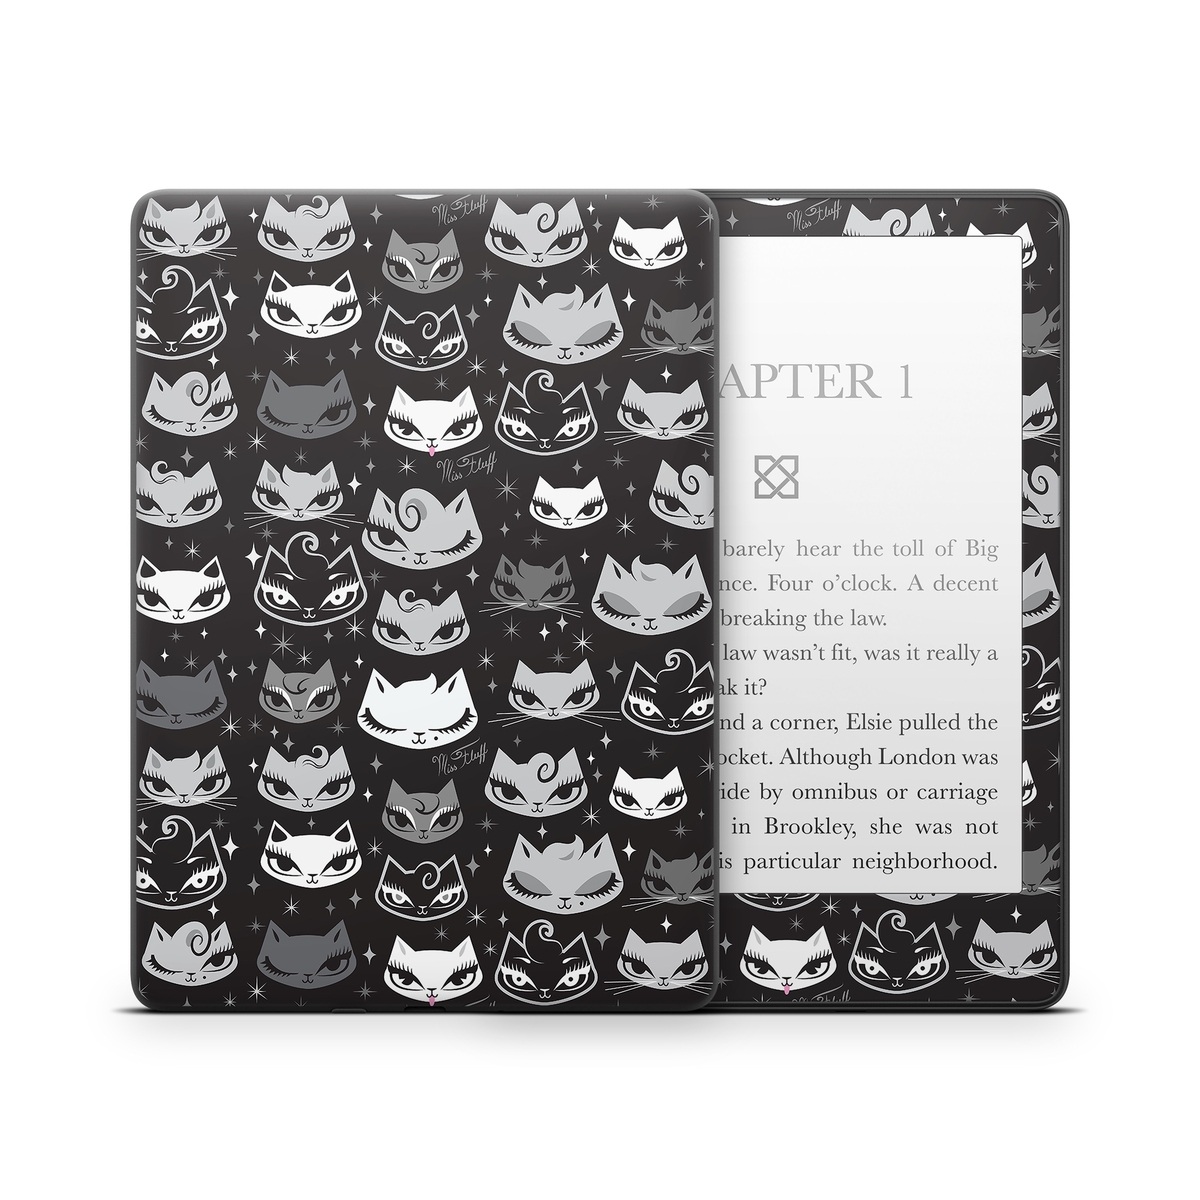 Amazon Kindle Paperwhite Skin - Billy Cats (Image 1)